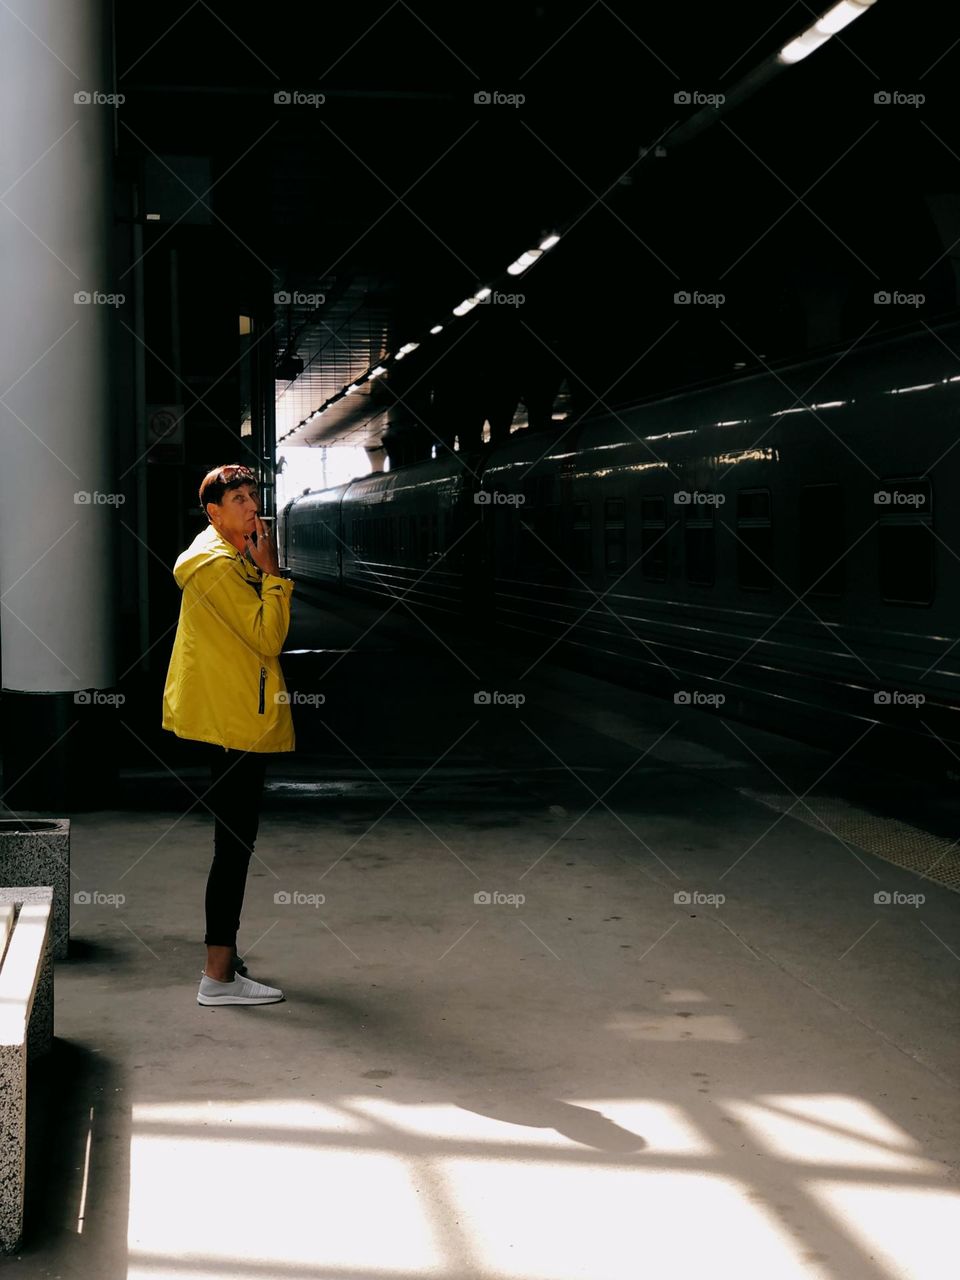 Adult woman with short hair wearing yellow jacket standing in a train station near a train, smoking.